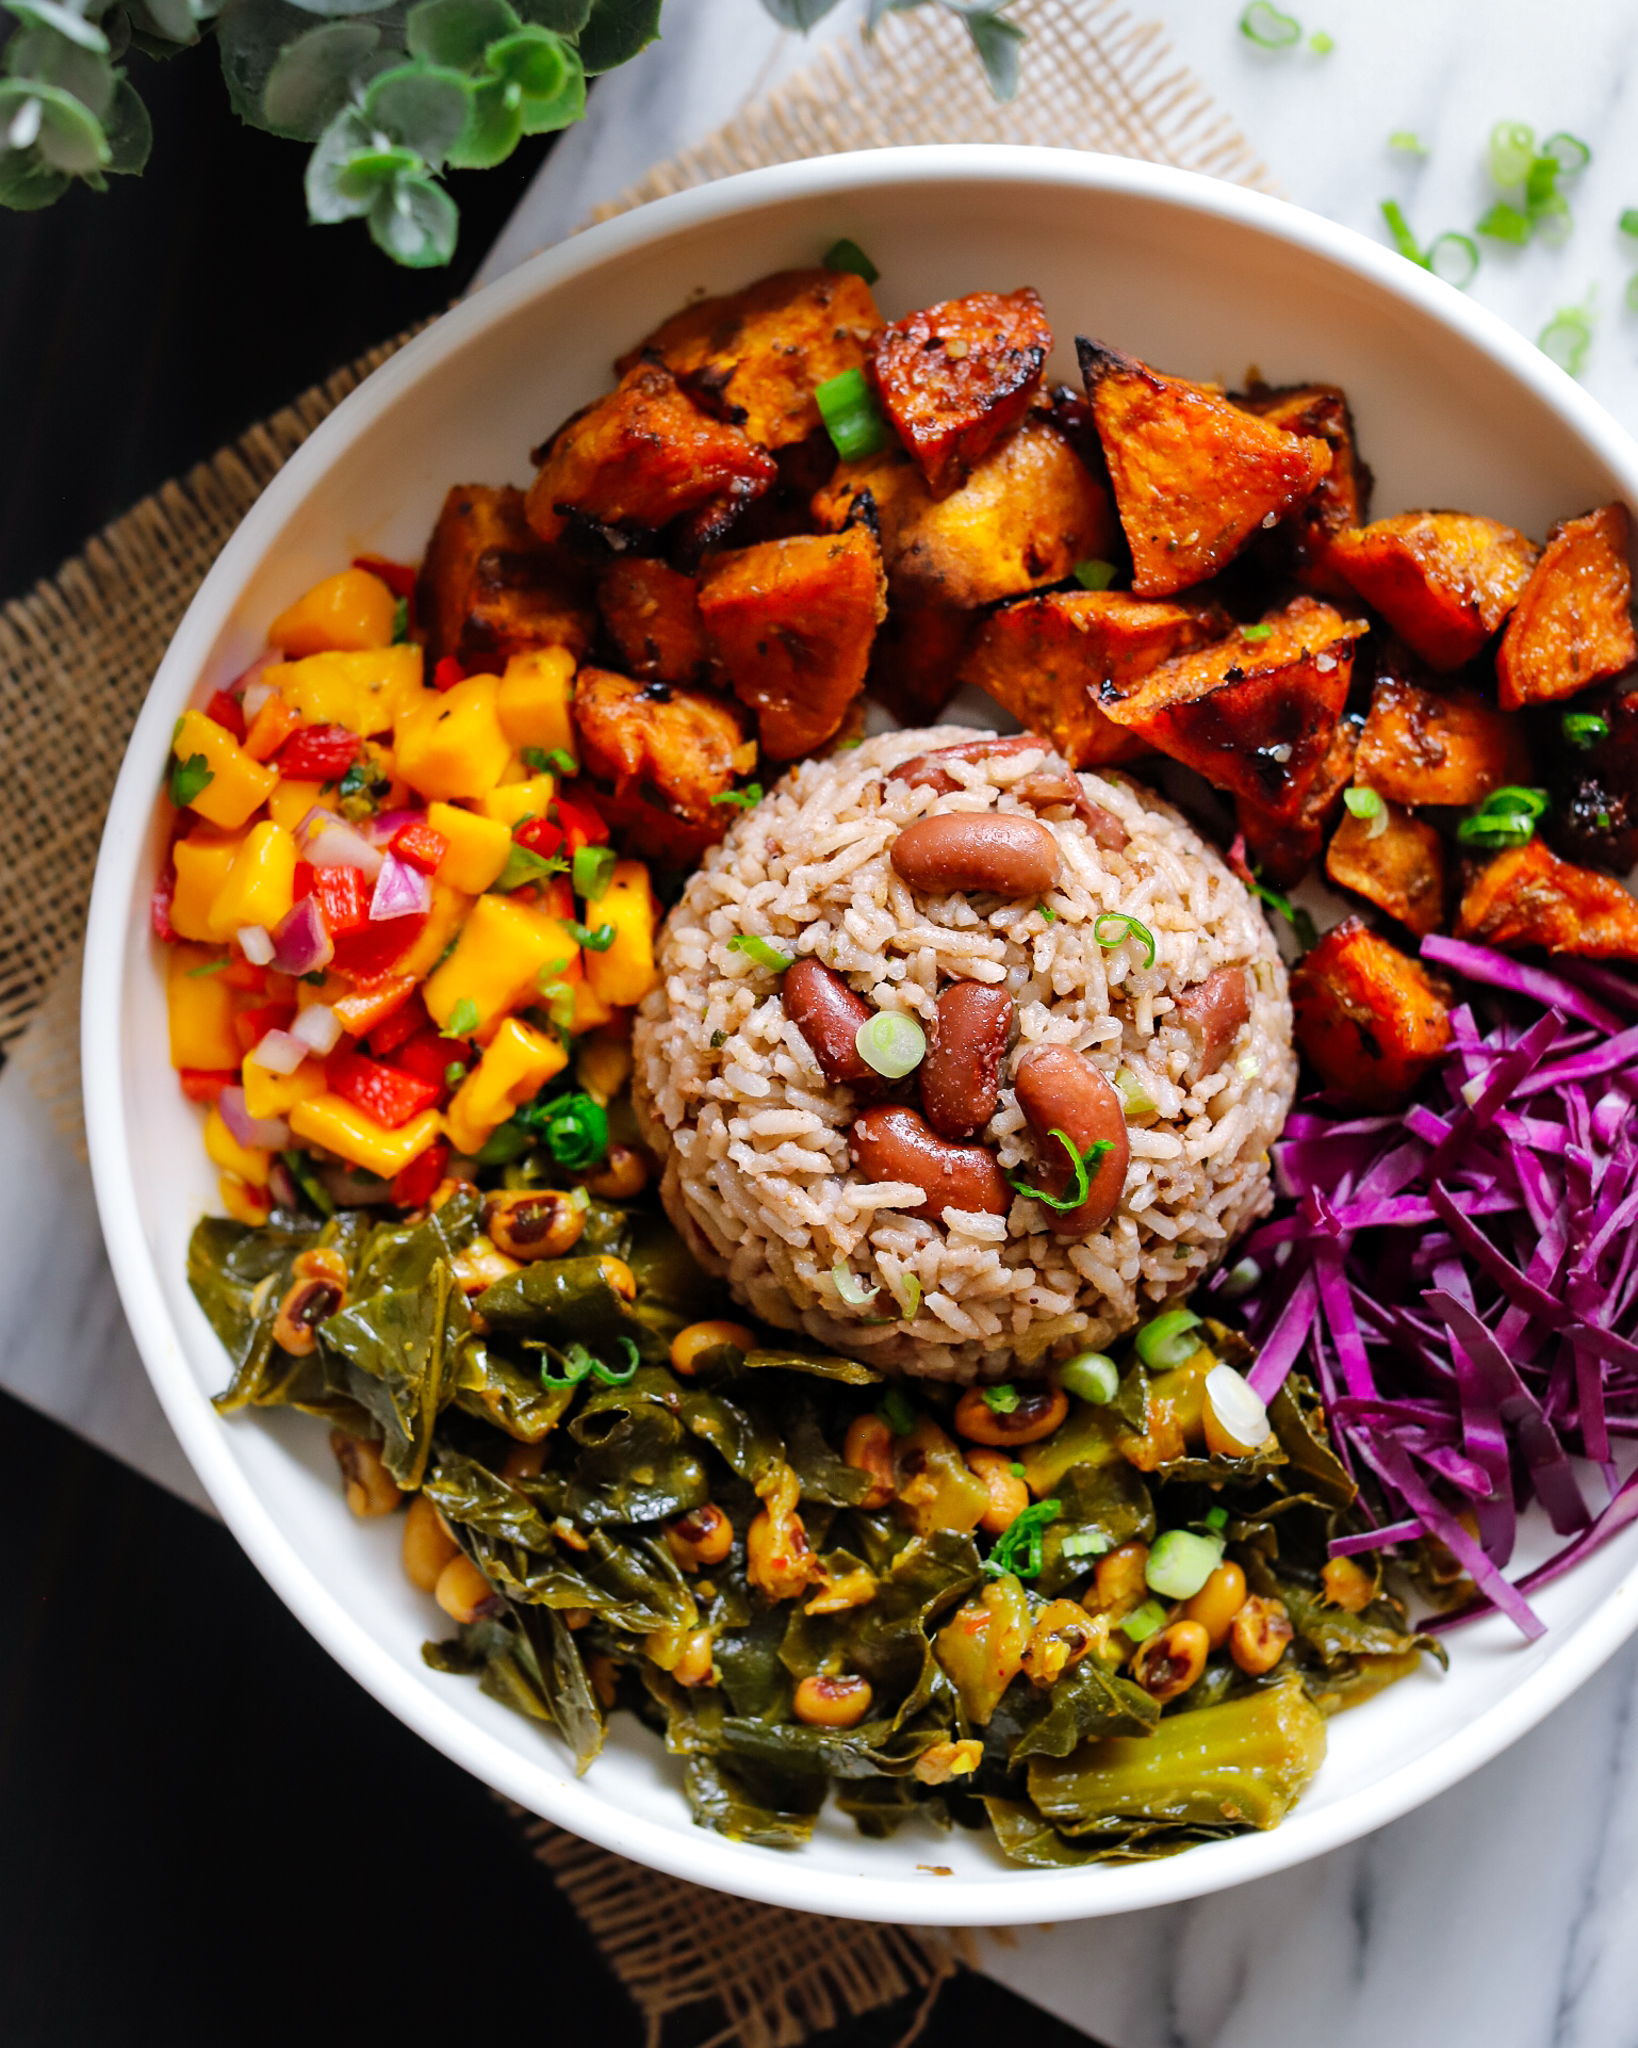 Jamaica Cookbook Reviews Unleashing the Flavors of the Caribbean